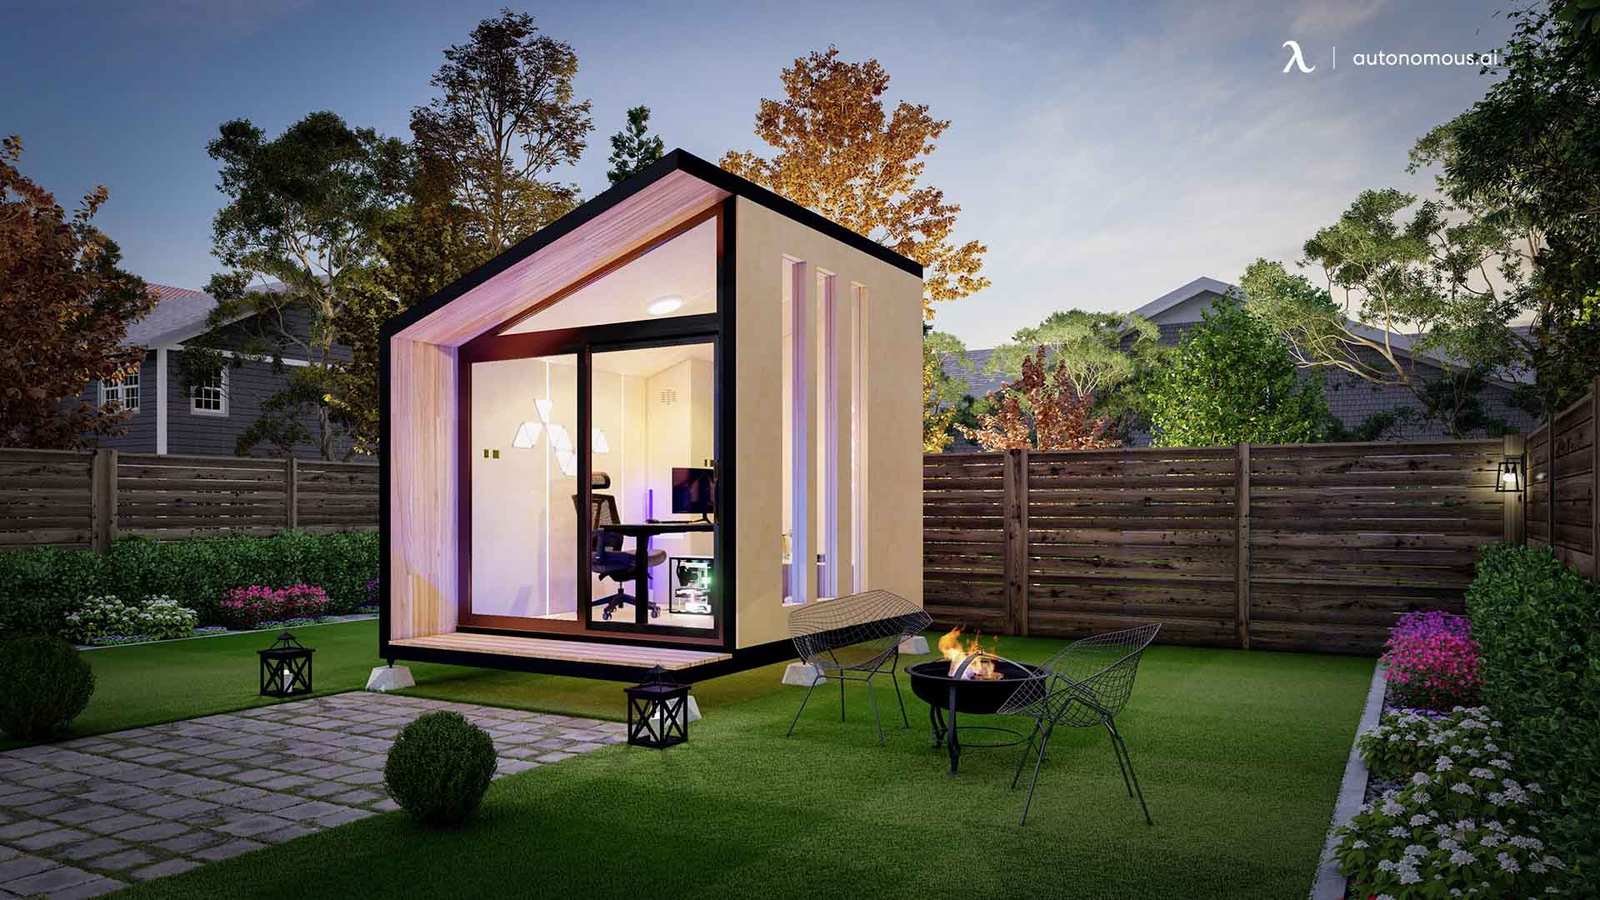 6 Luxury Garden Sheds Will Change Your Life